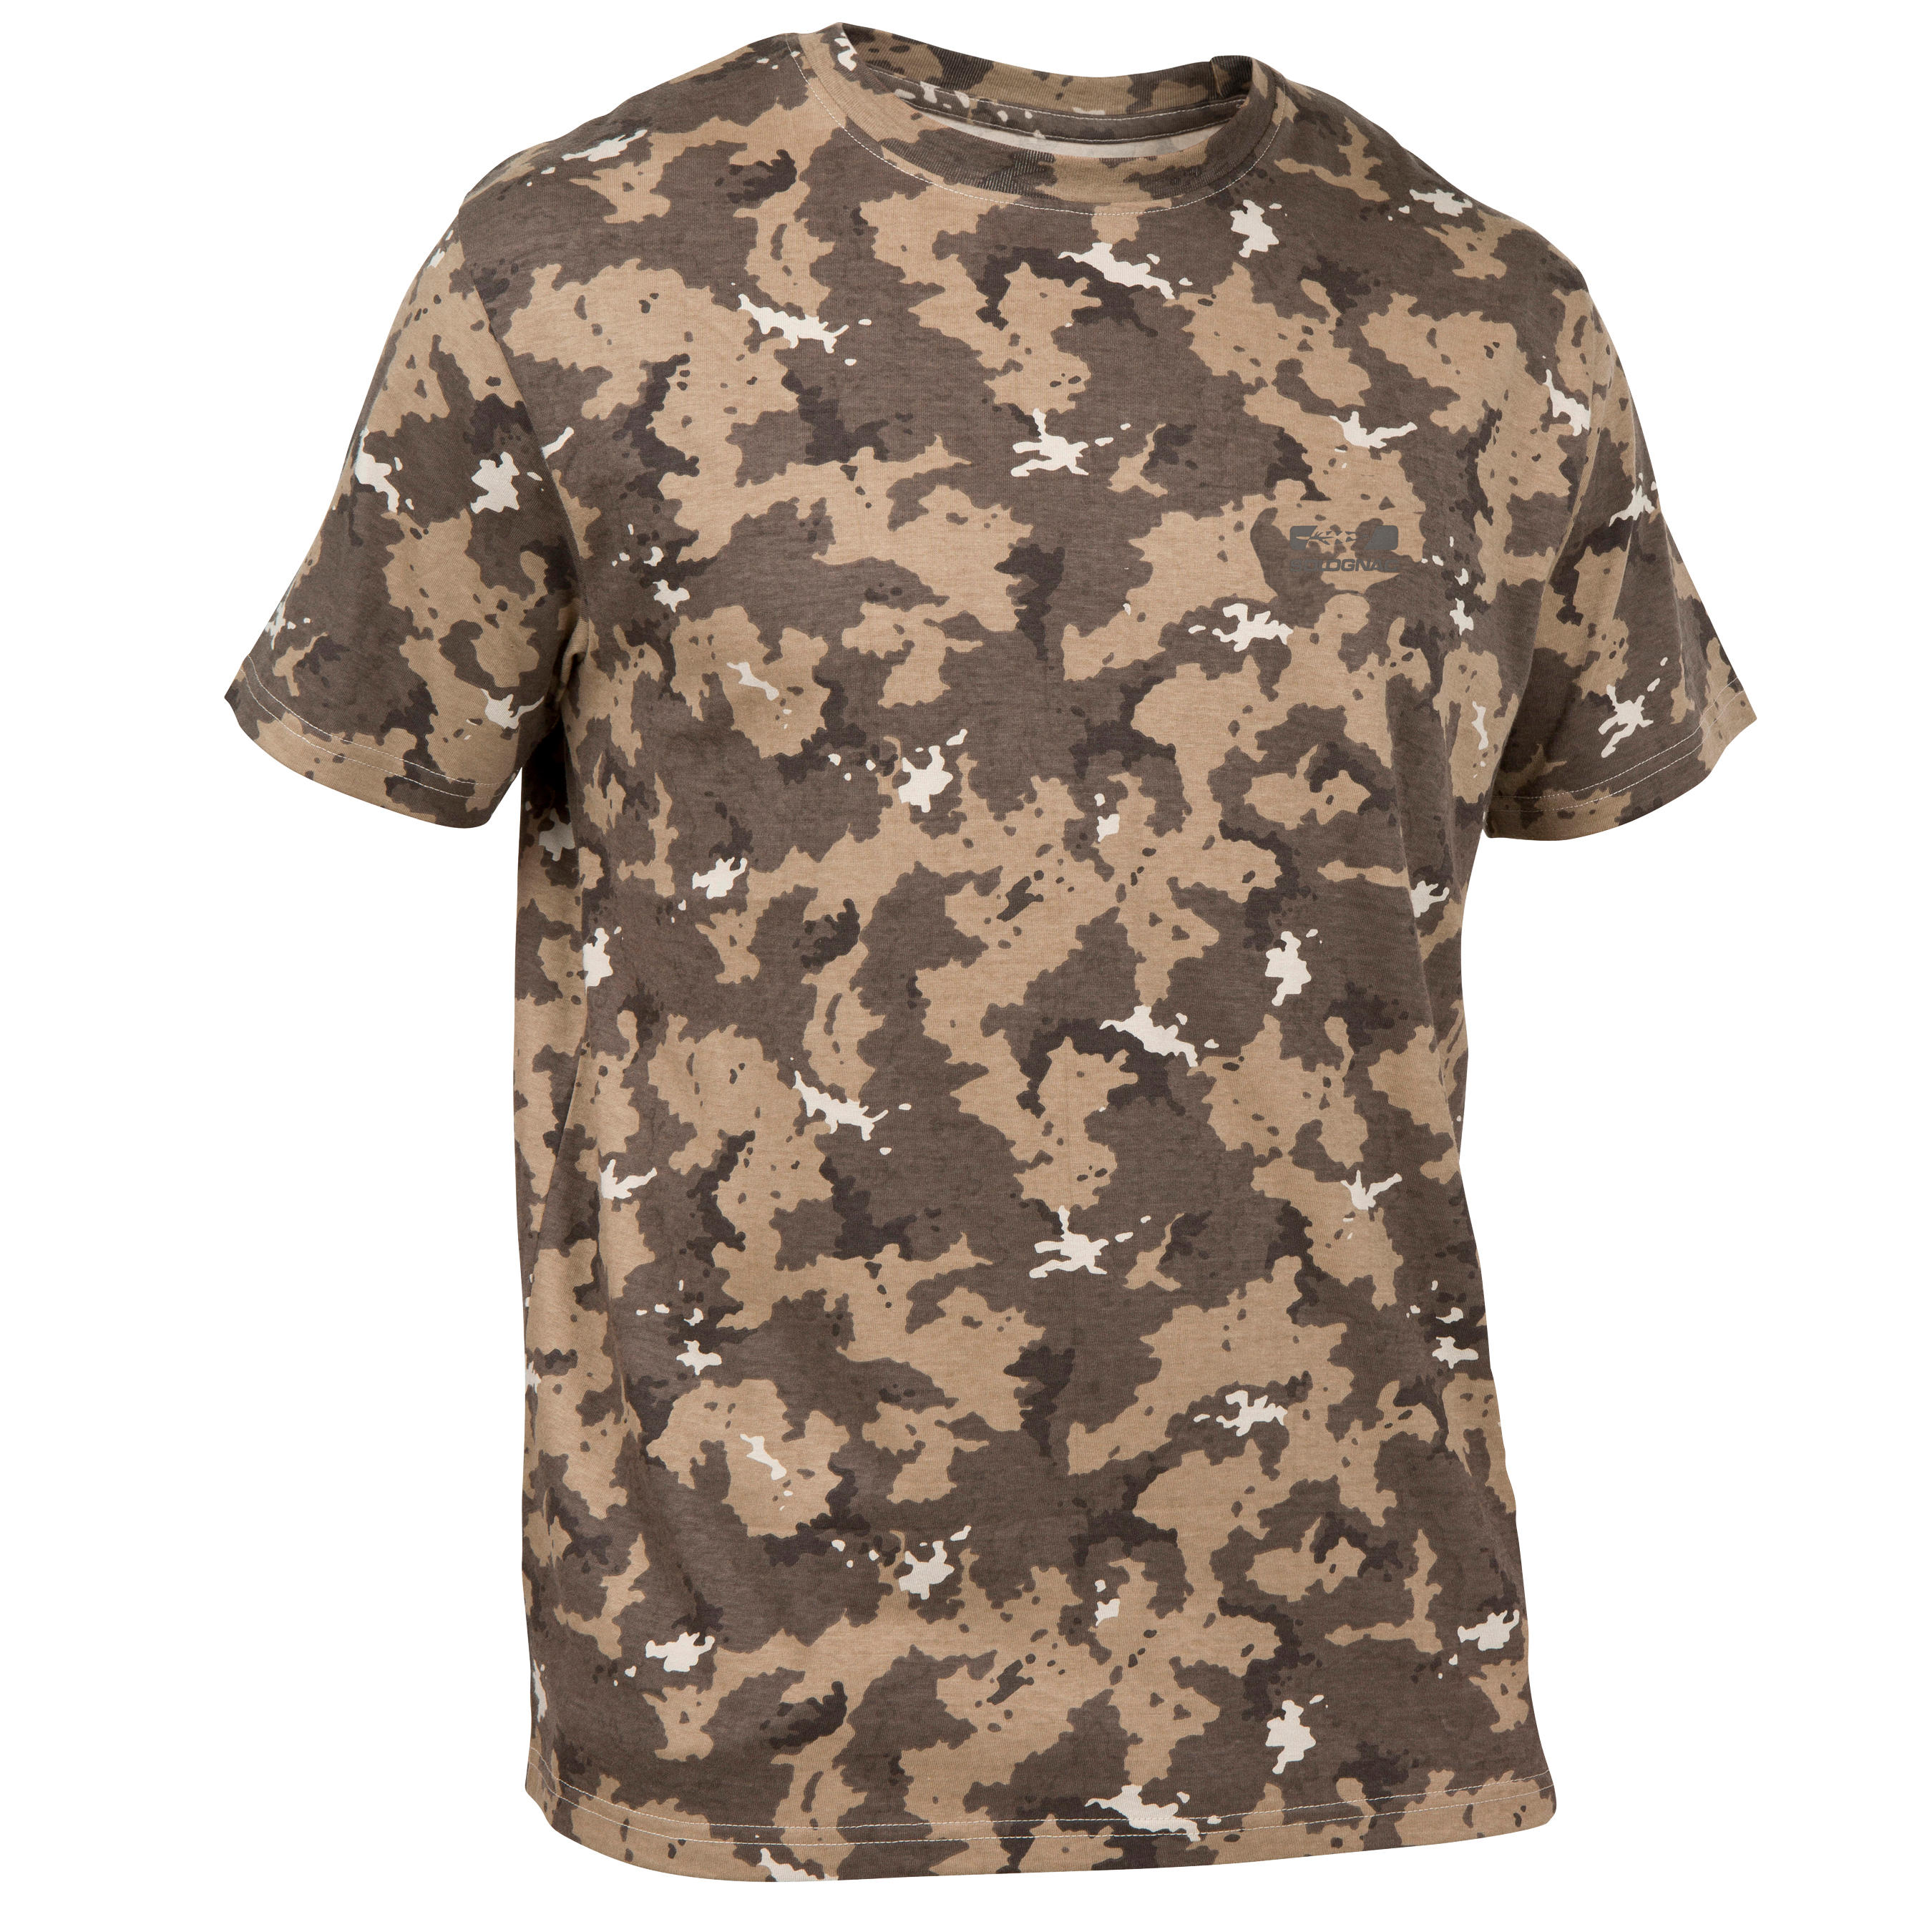 Buy Camouflaged T-shirt for Outdoor 